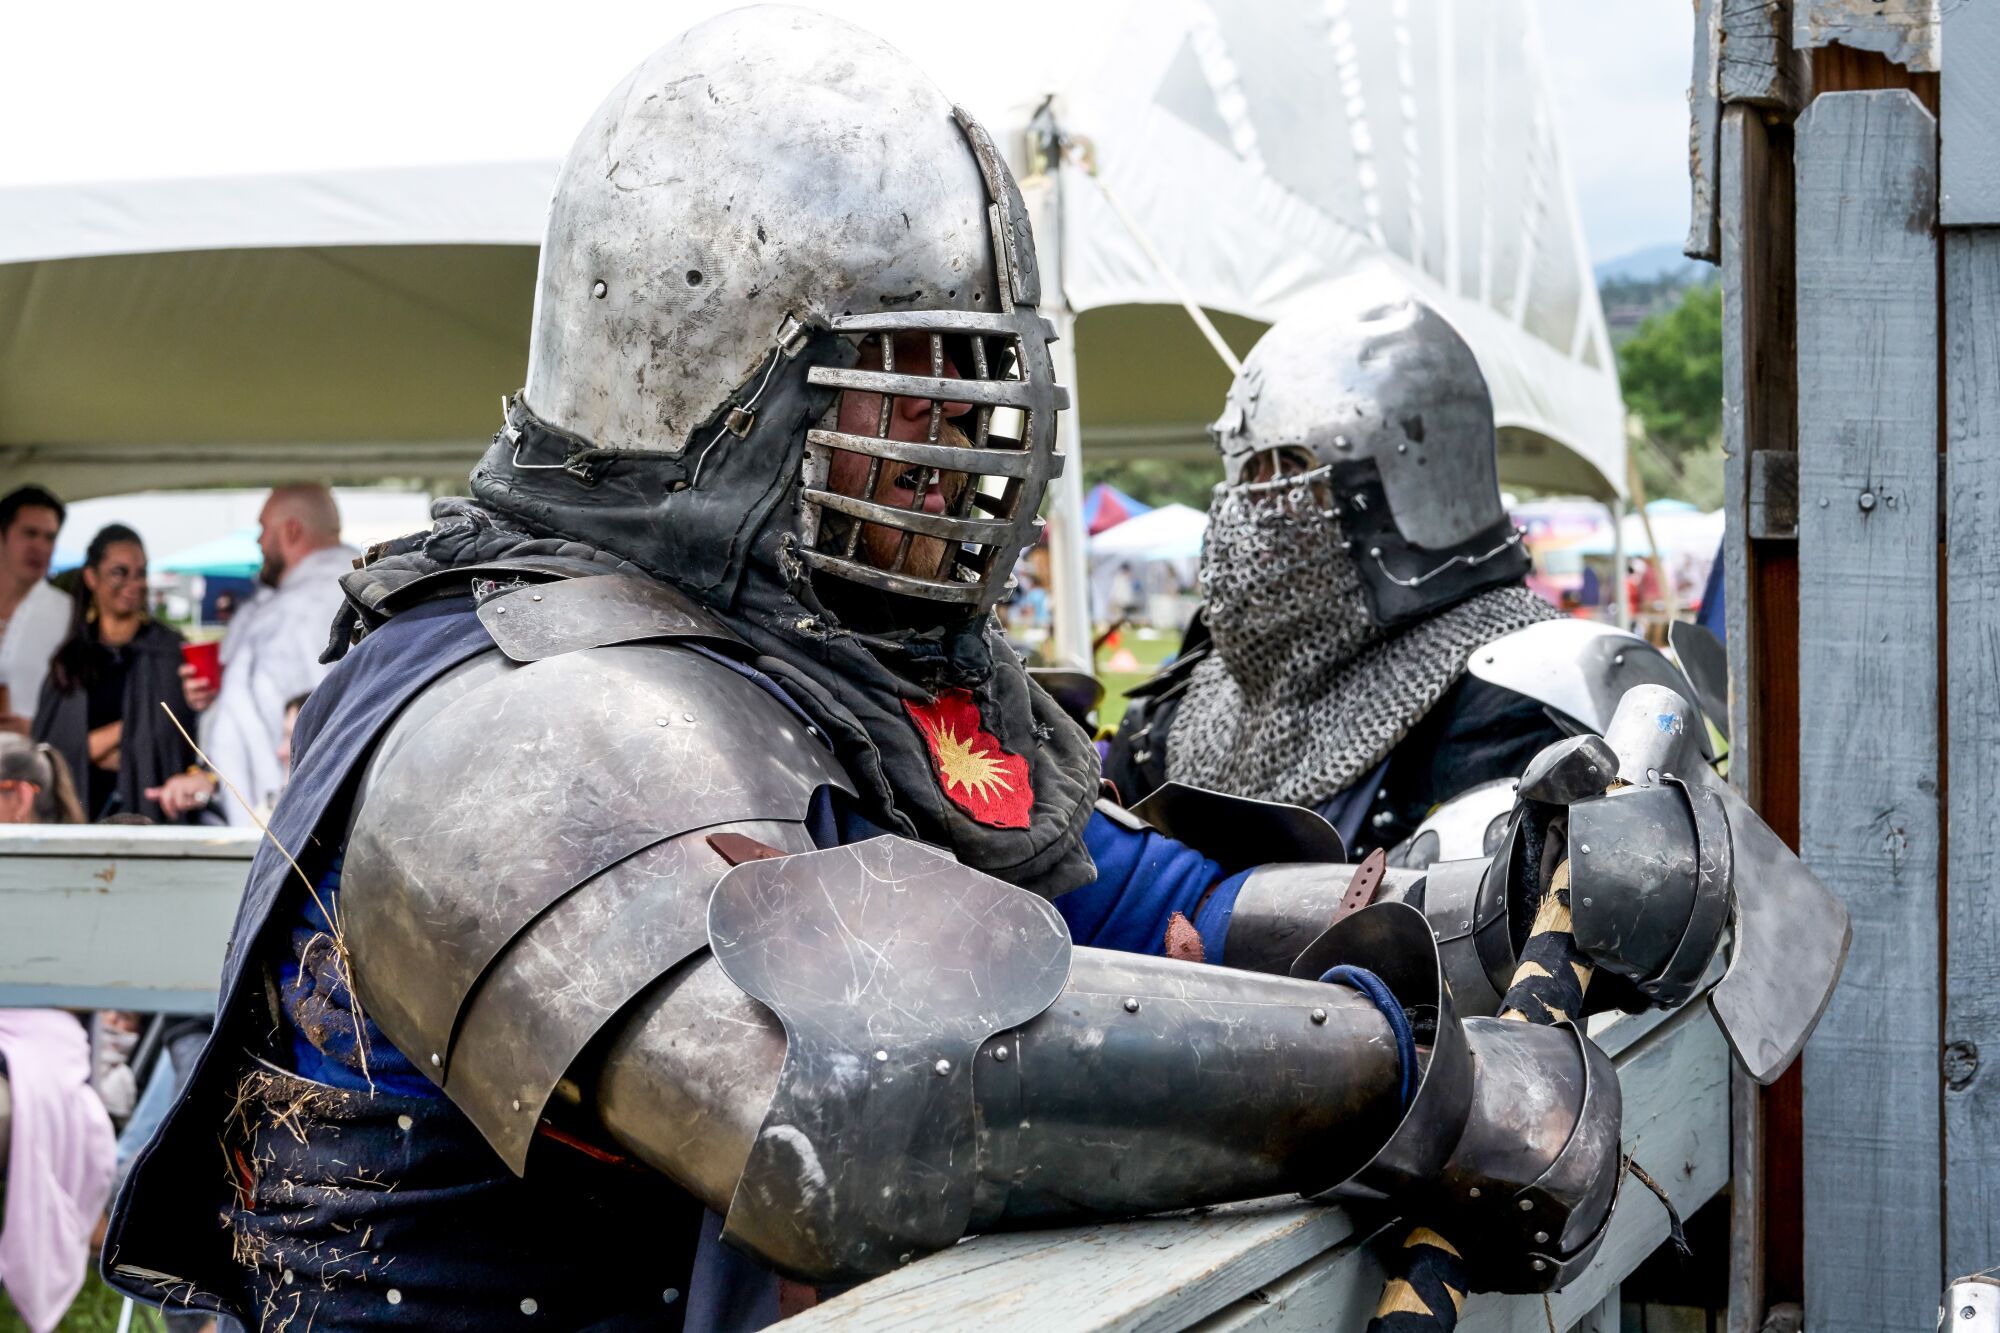 Participants in armor lean on a fence, waiting for a match to begin.